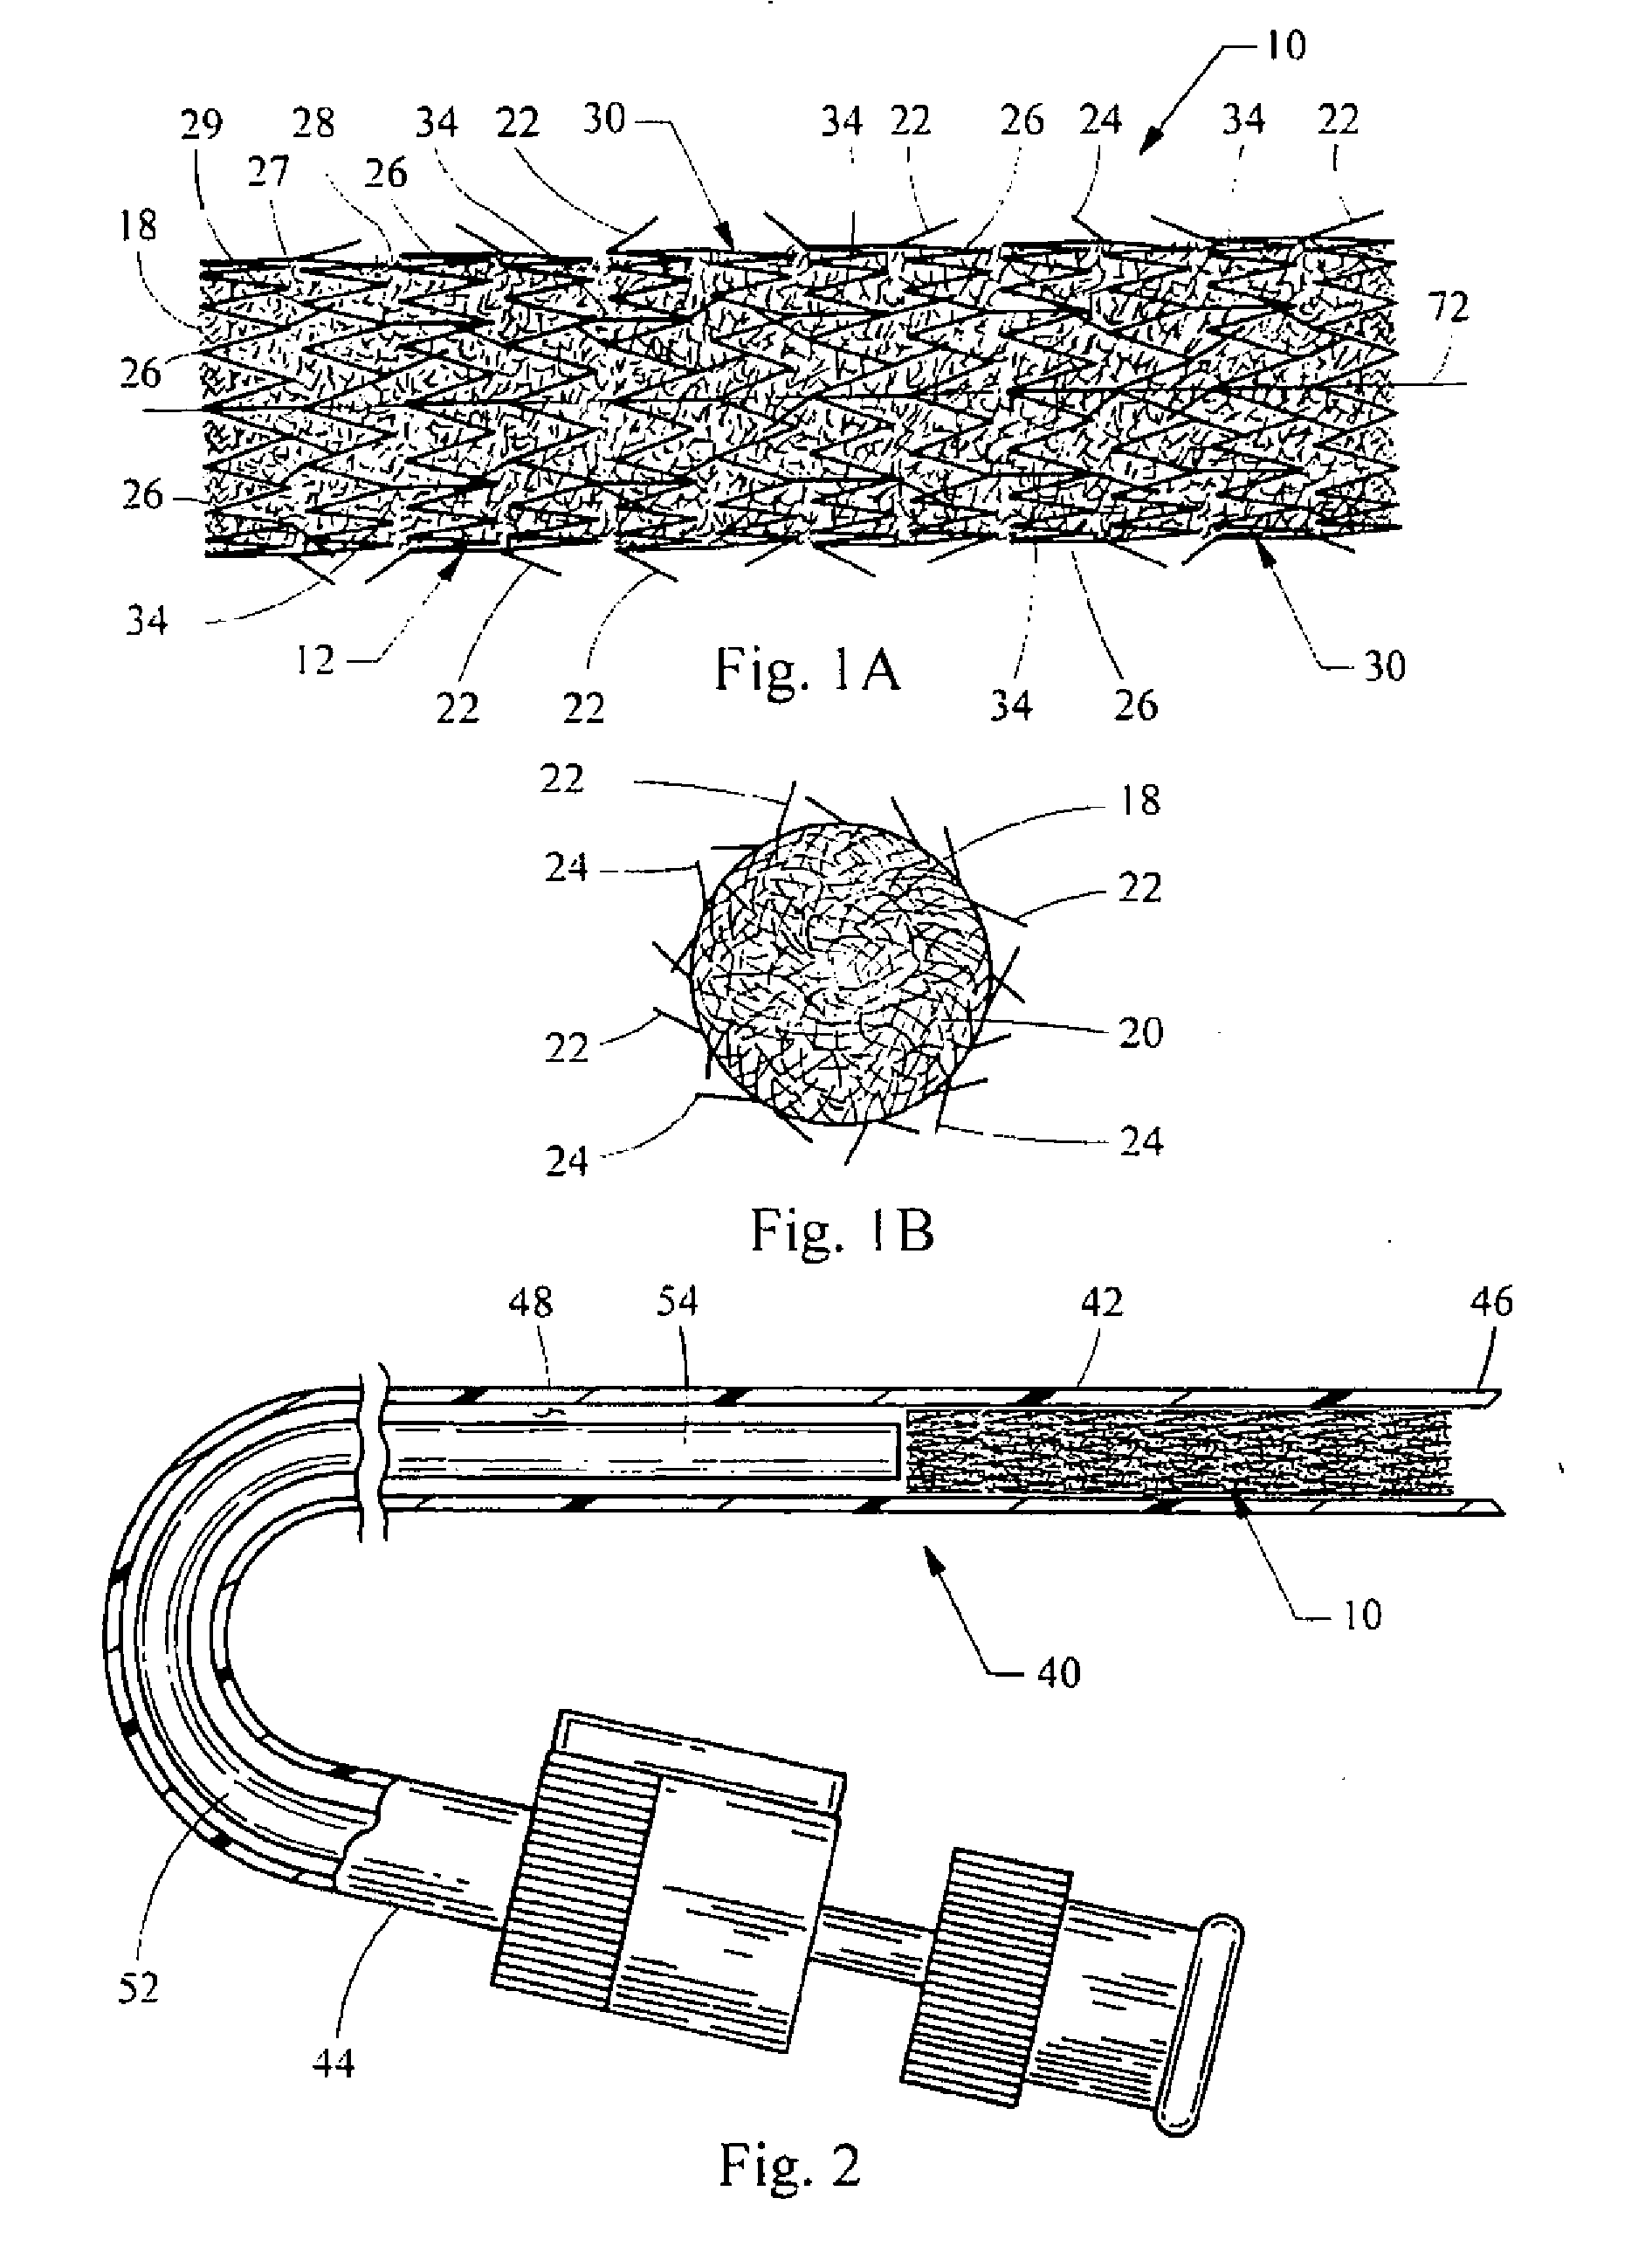 Barbed stent vascular occlusion device